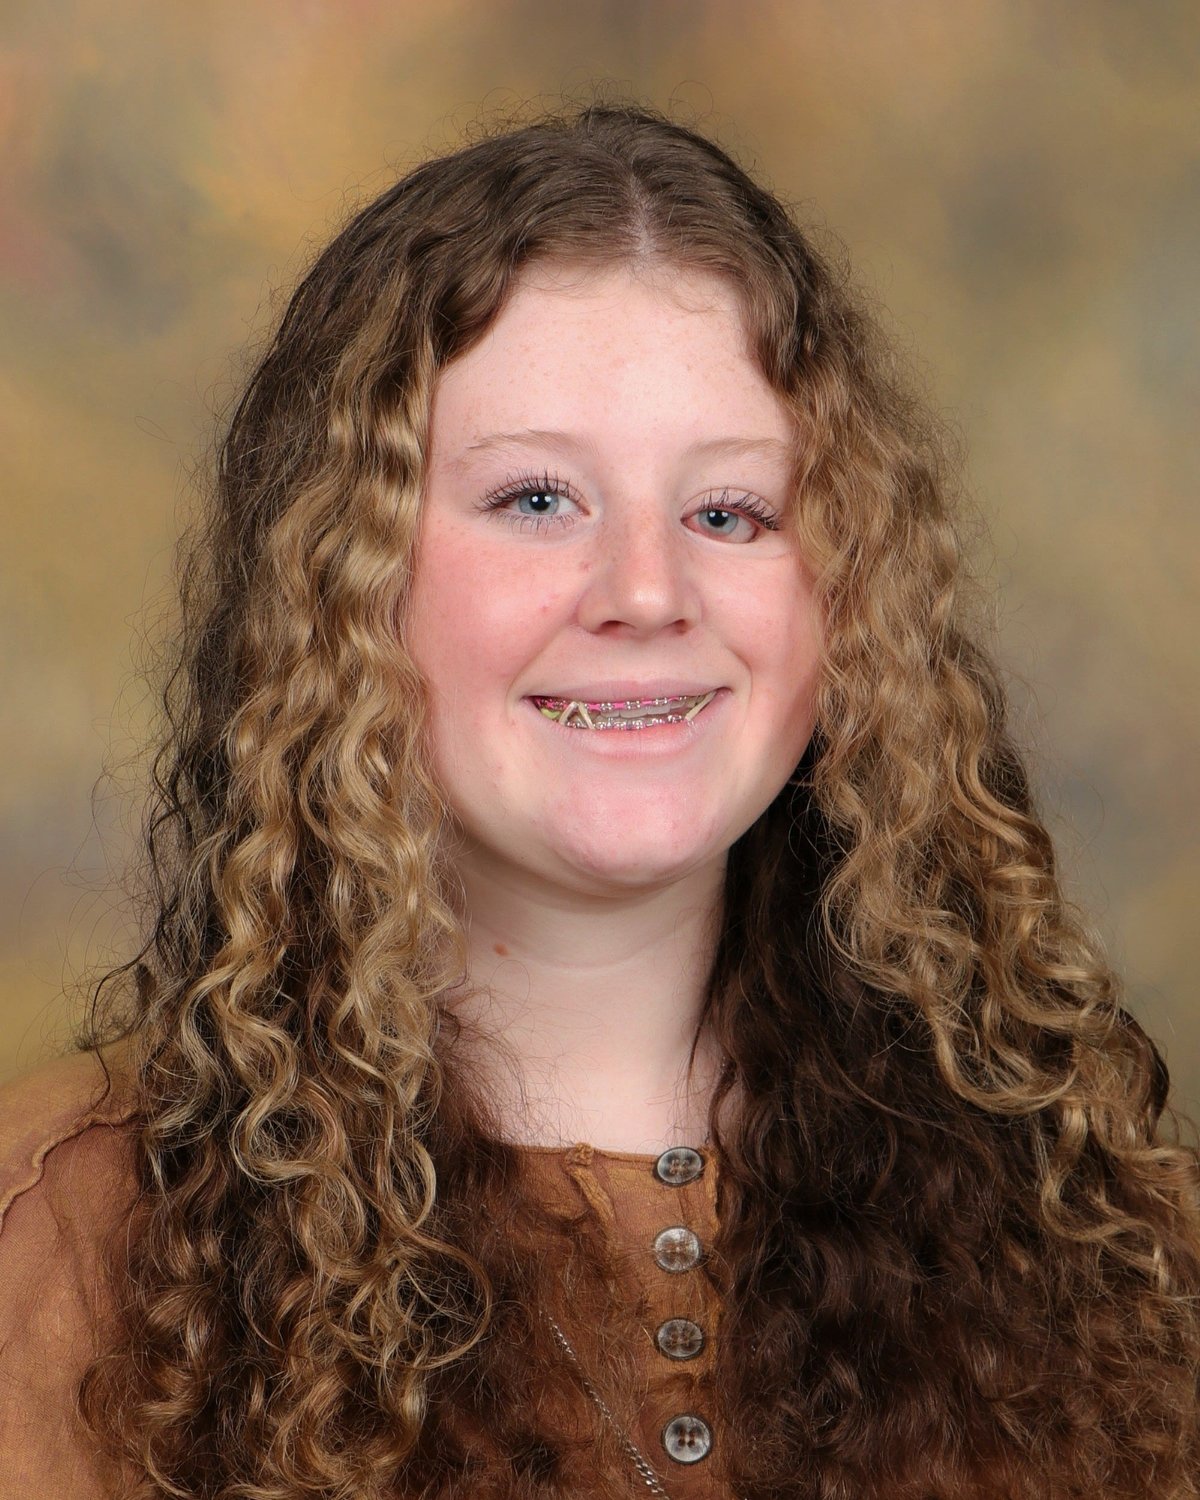 Emma Dumas wanted to make a positive change while attending Daphne Middle School. She created the Kindness Club in an effort to help students connect with others and form friendships.